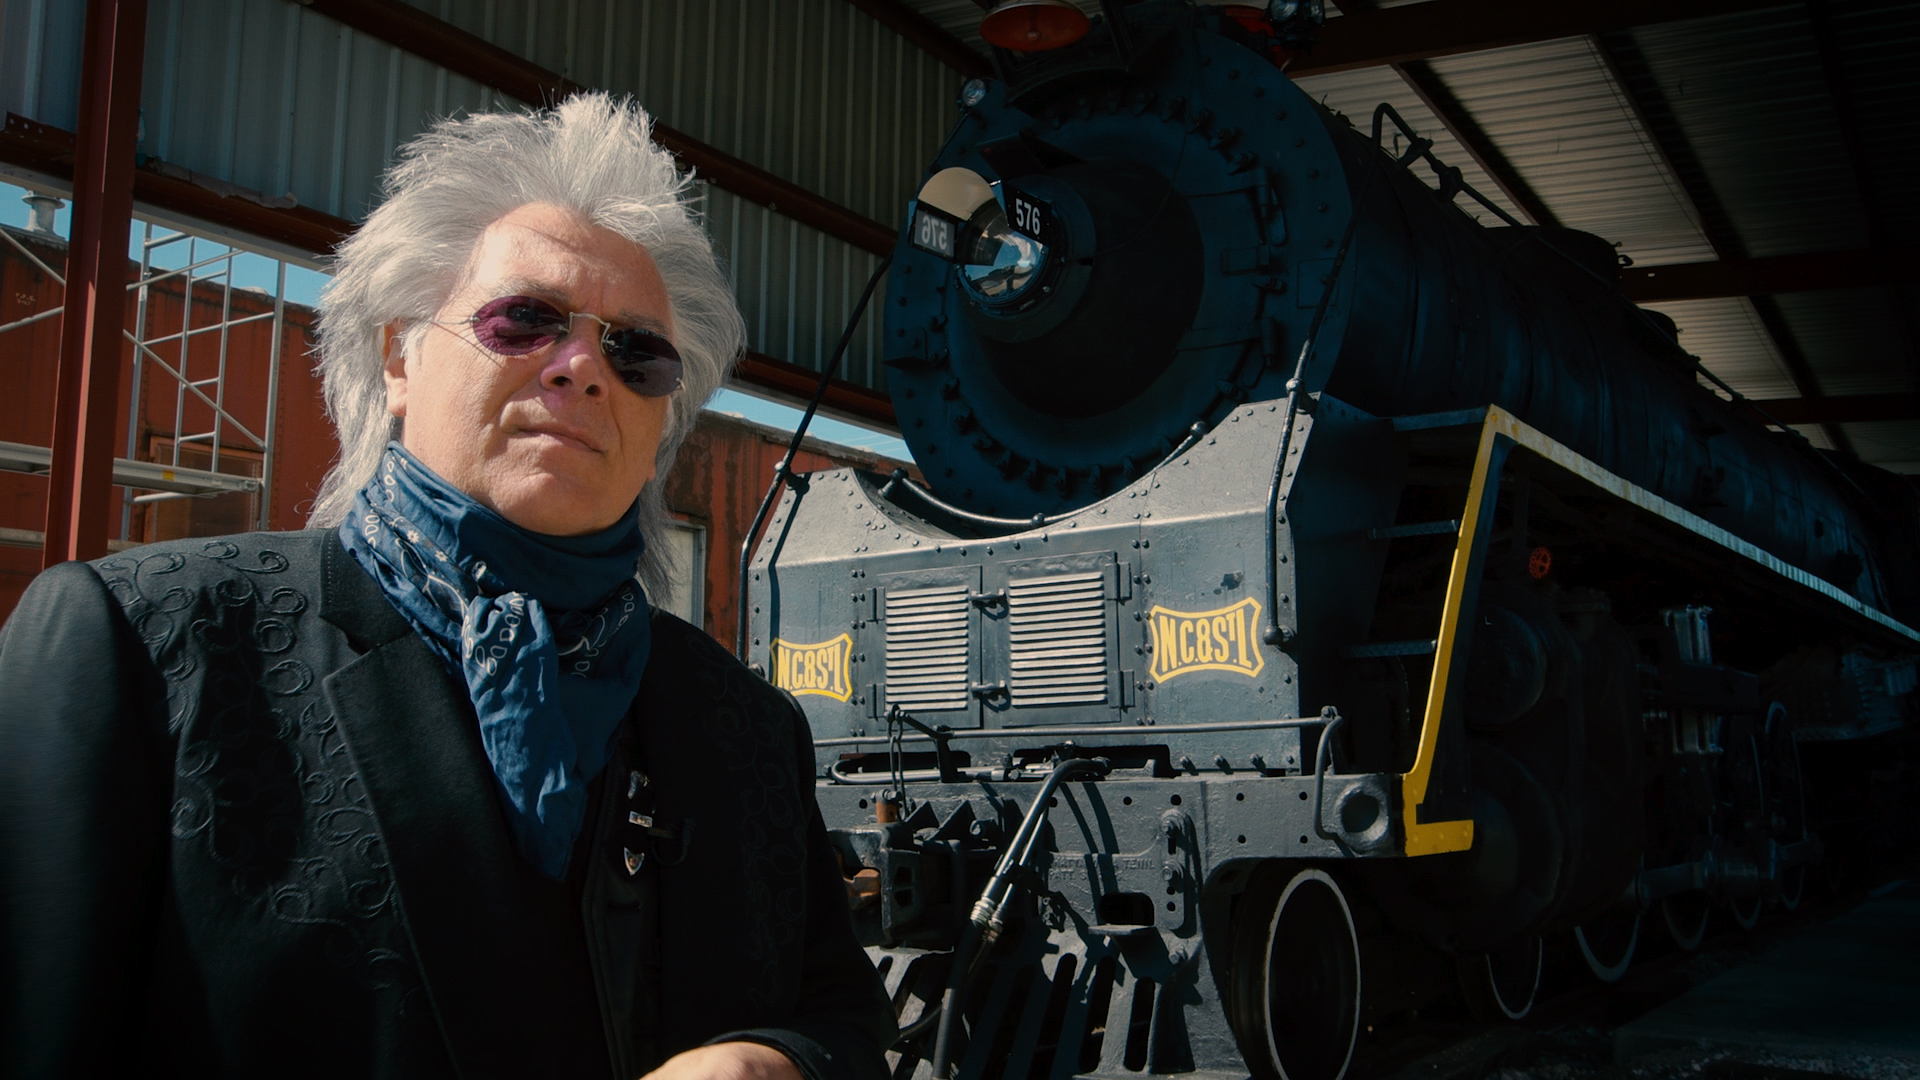 Musician Marty Stuart standing in front of locomotive